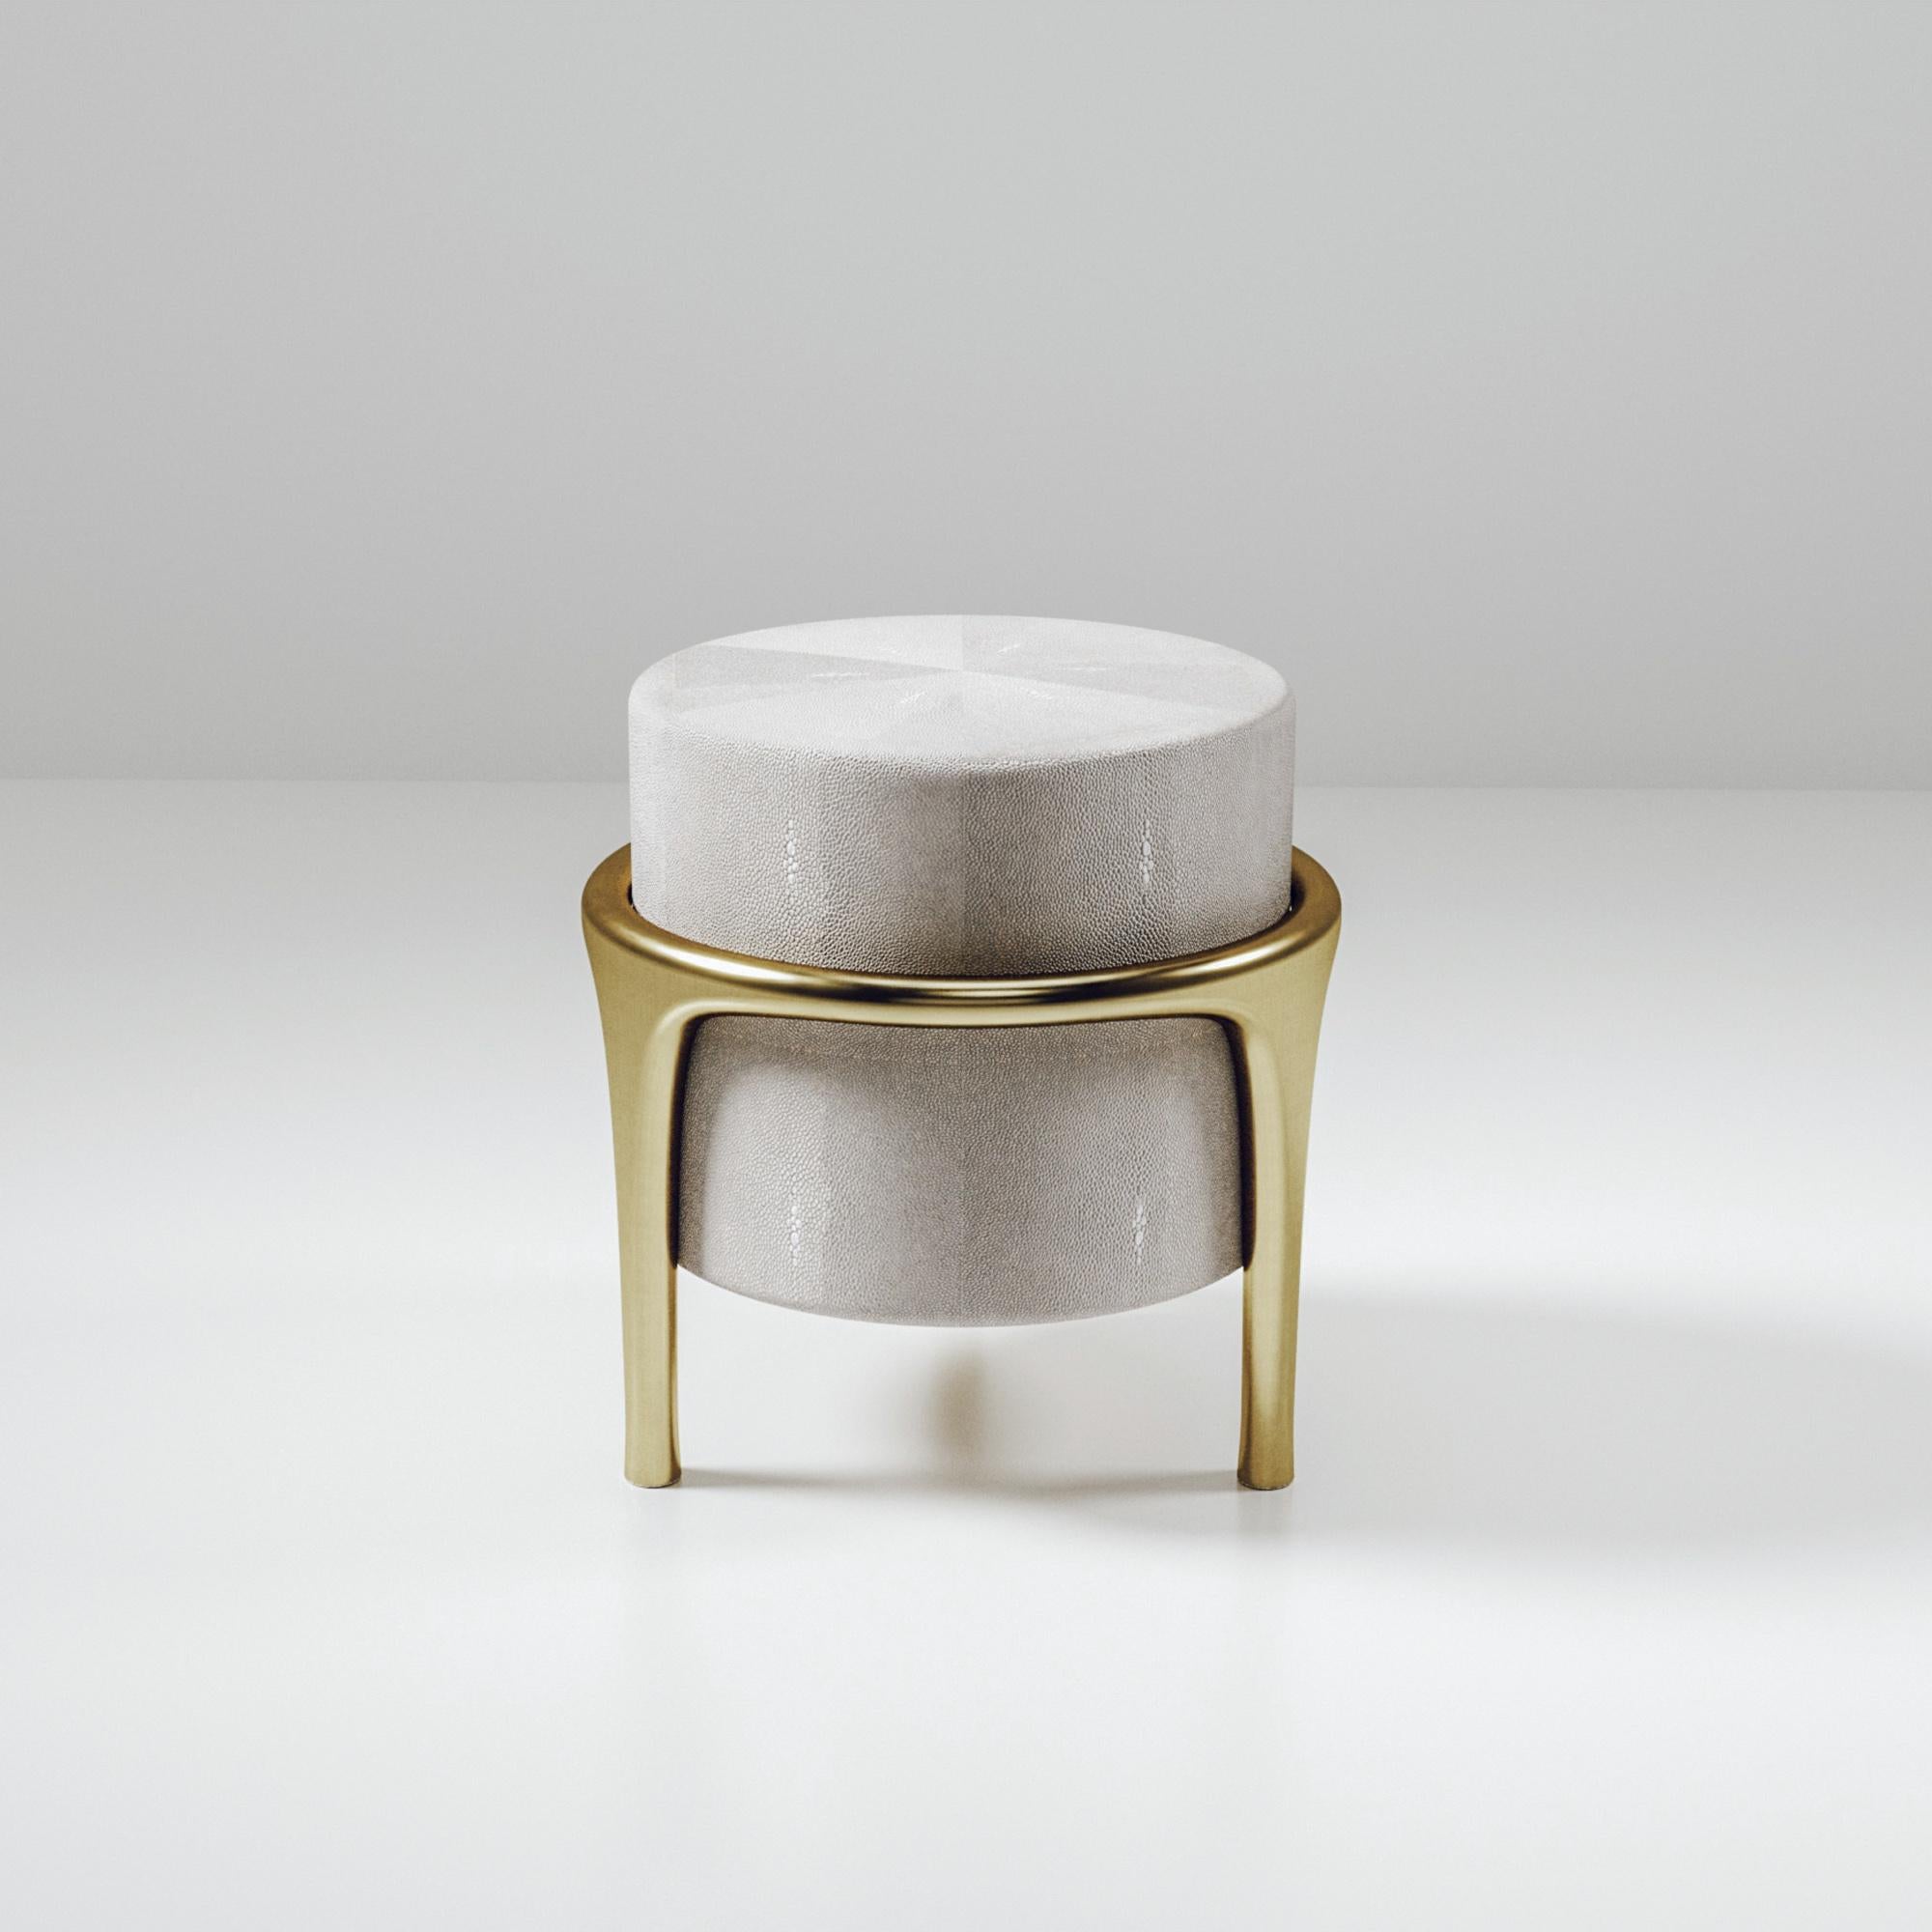 The Ramo Stool by R & Y Augousti is an elegant and versatile piece. The cream shagreen inlaid piece provides comfort while retaining a unique aesthetic with the bronze-patina brass frame and details. This listing is priced for shagreen inlay, see